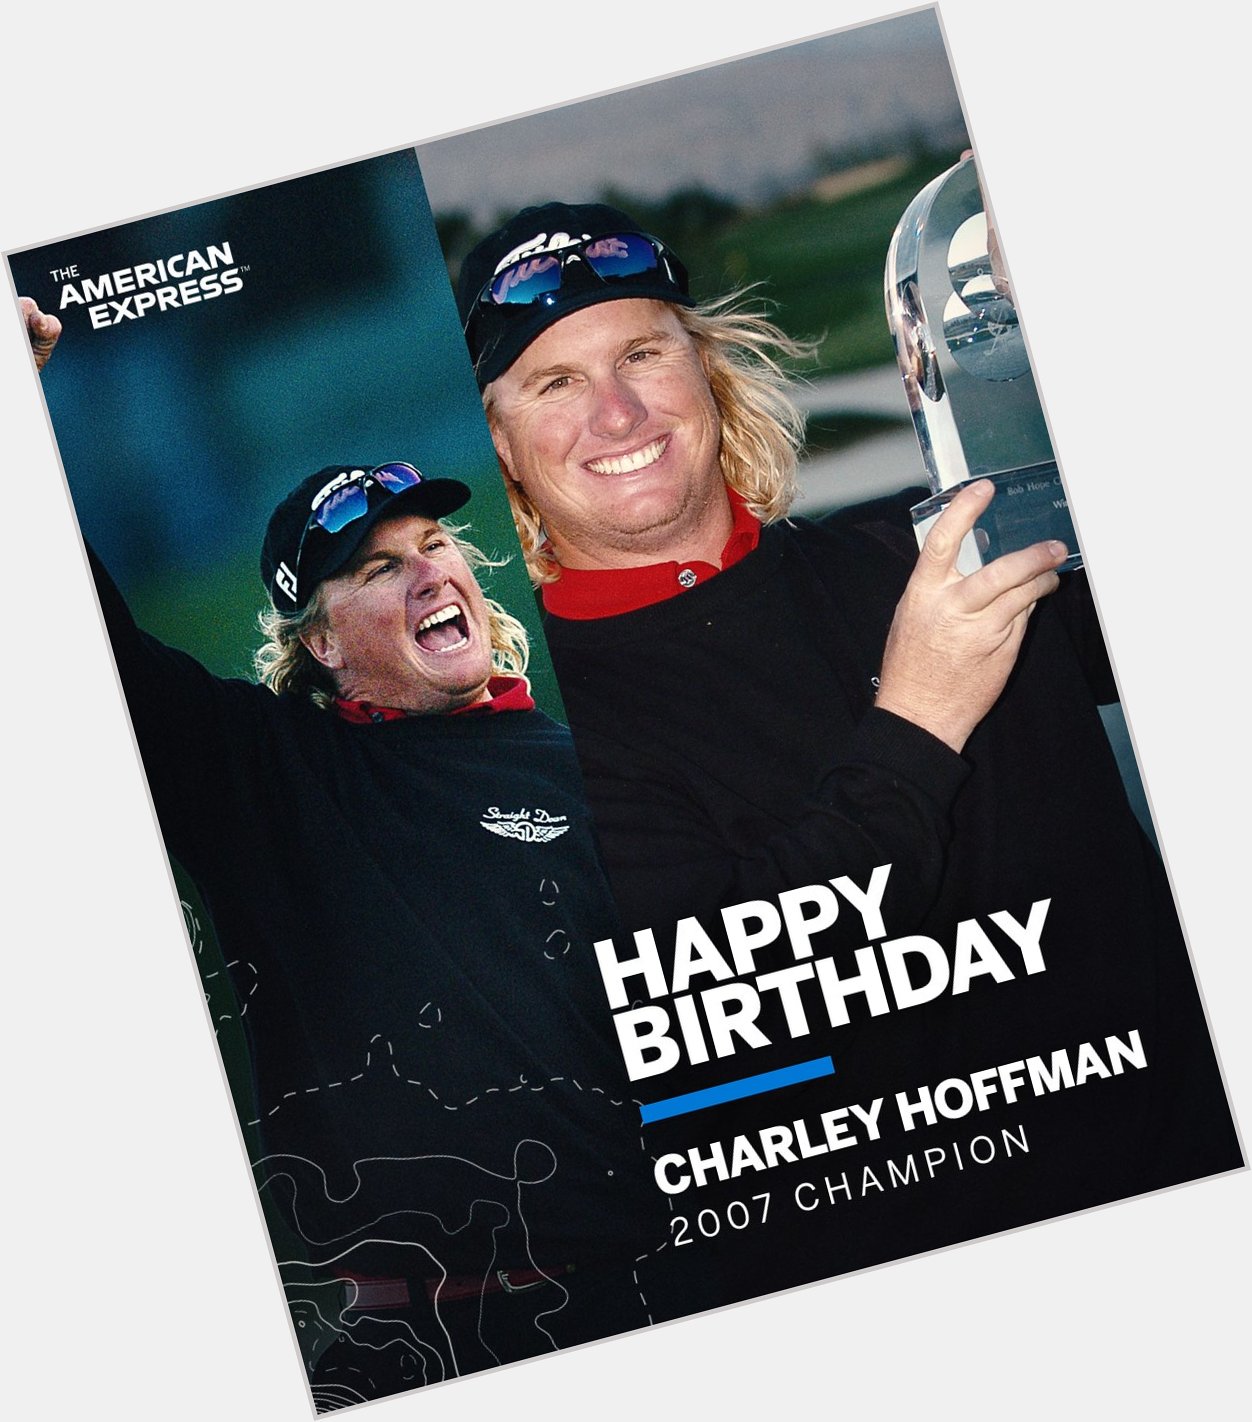 Happy birthday to our 2007 Champion, Charley Hoffman 